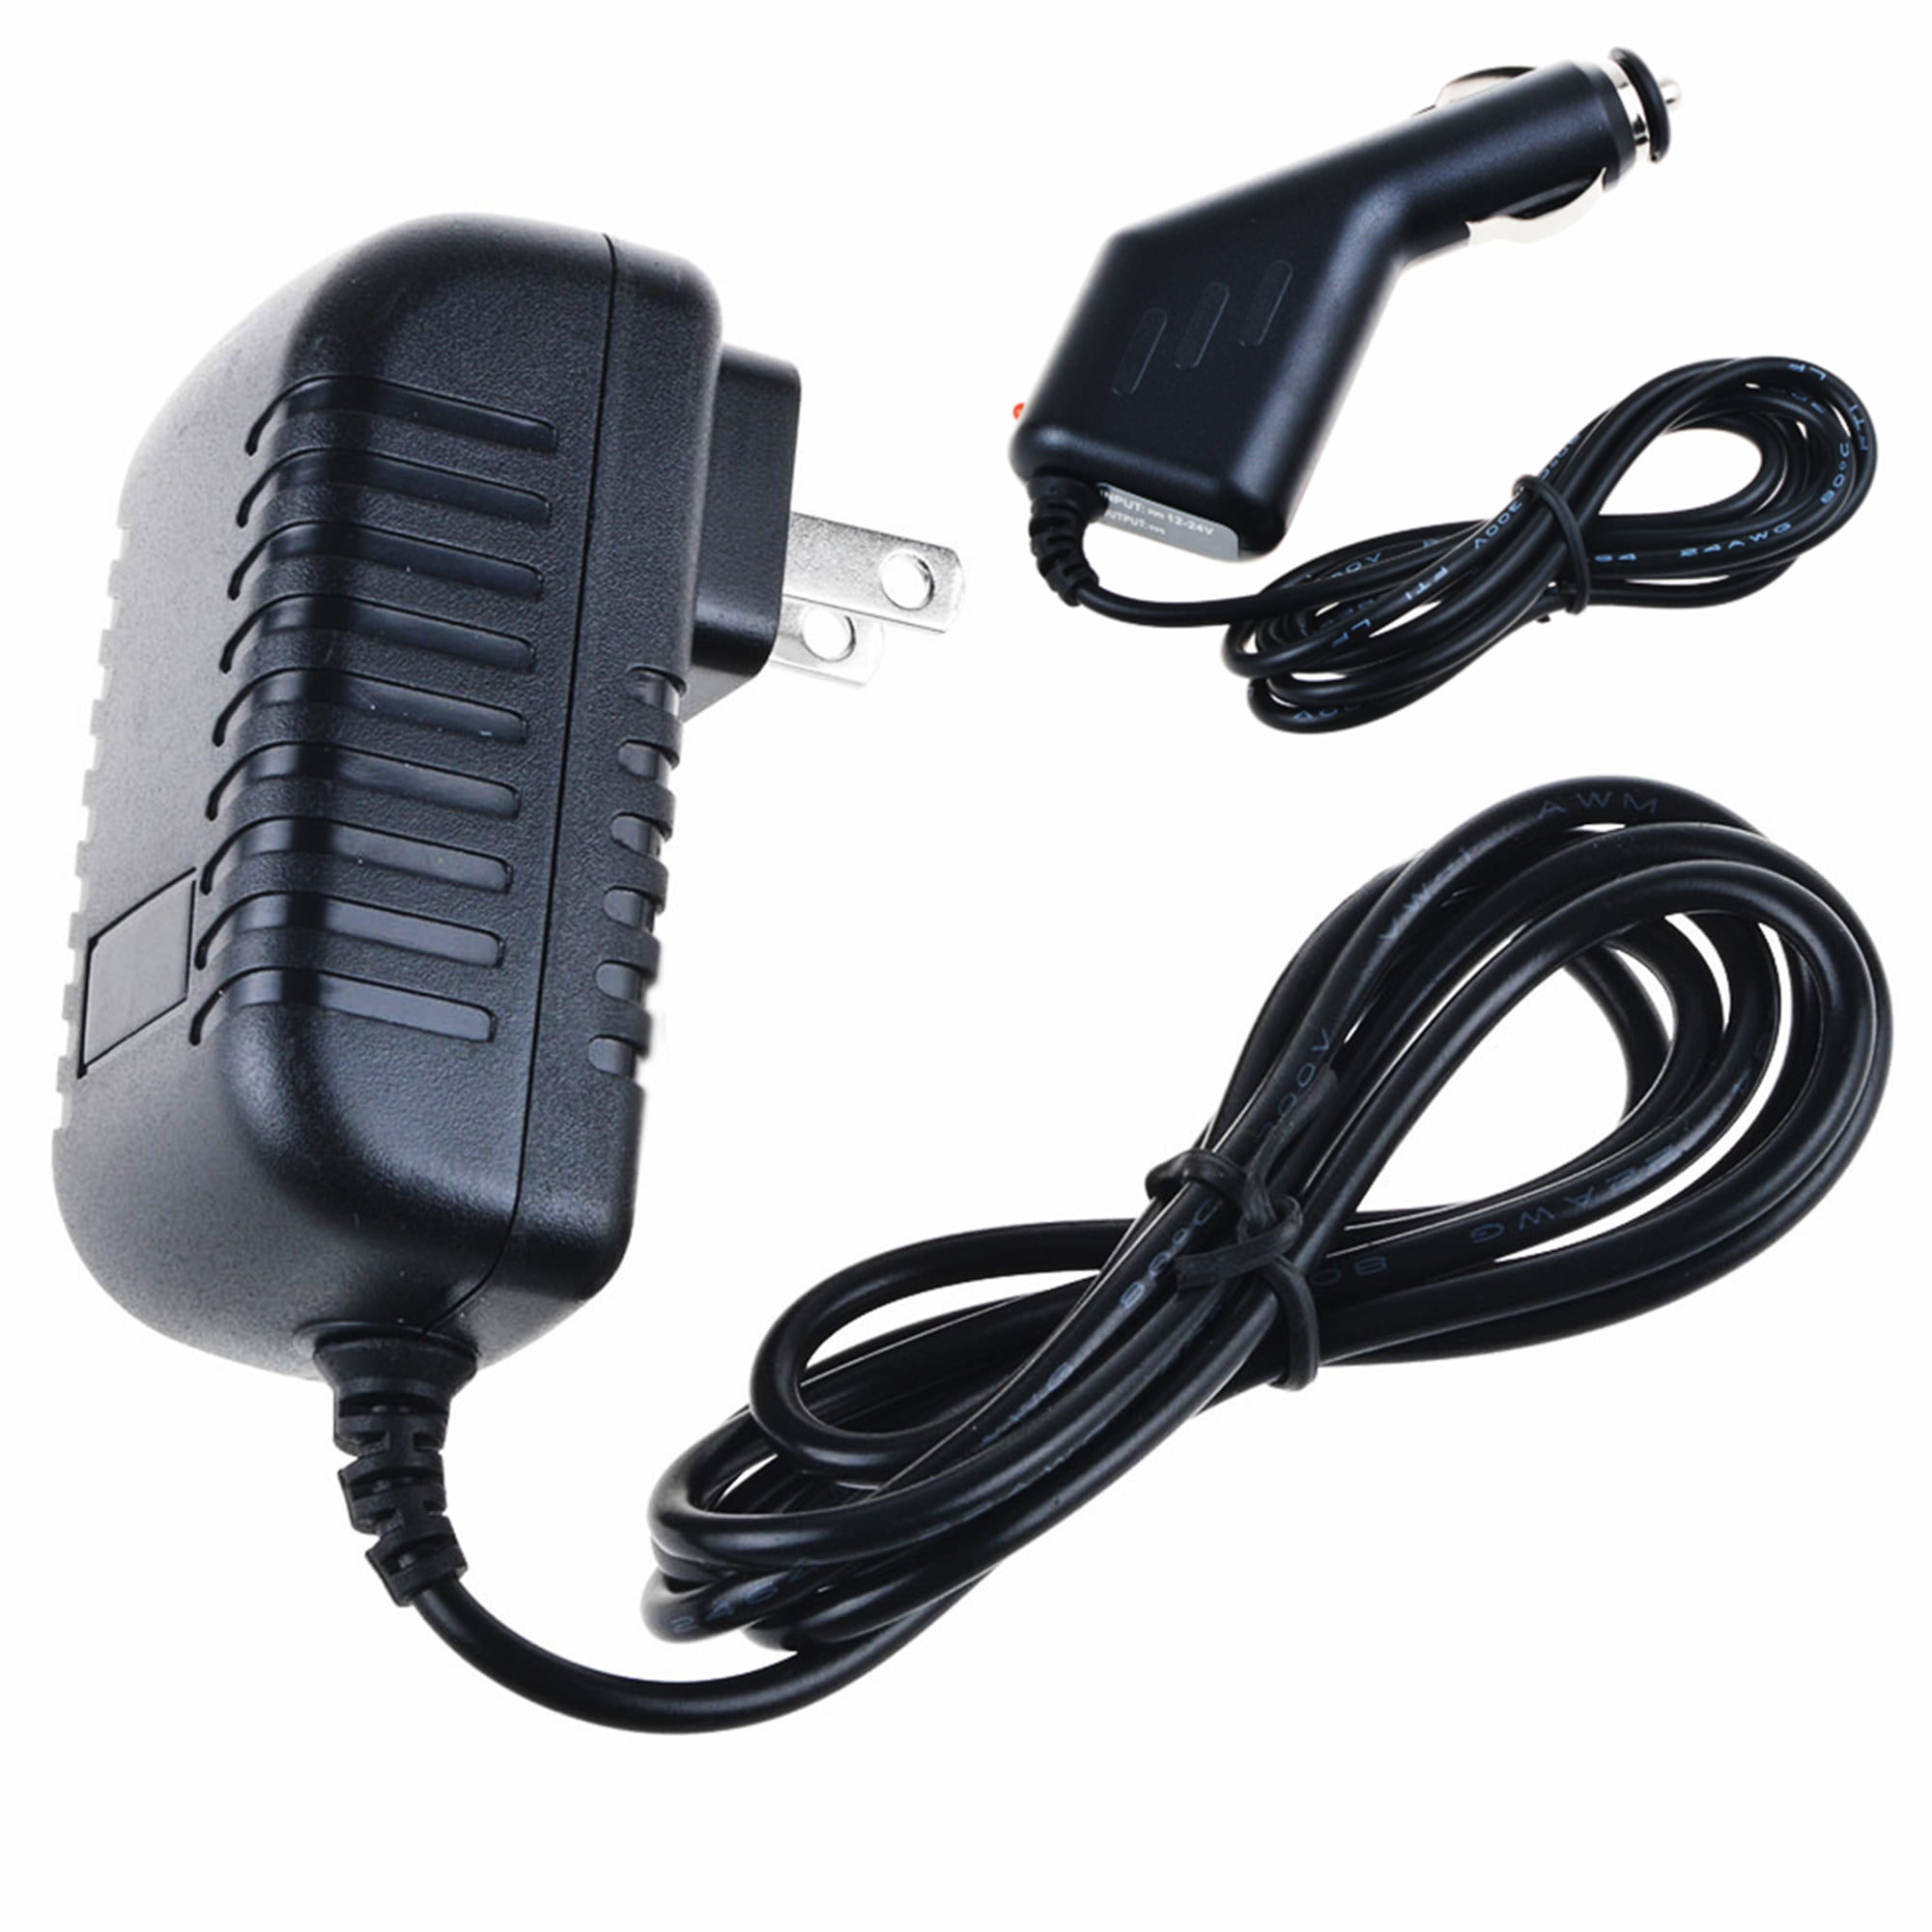 AC/DC Adapter Power Cord For RCA Cambio W1162 W116 W101 V2 Tablet Car Charger 